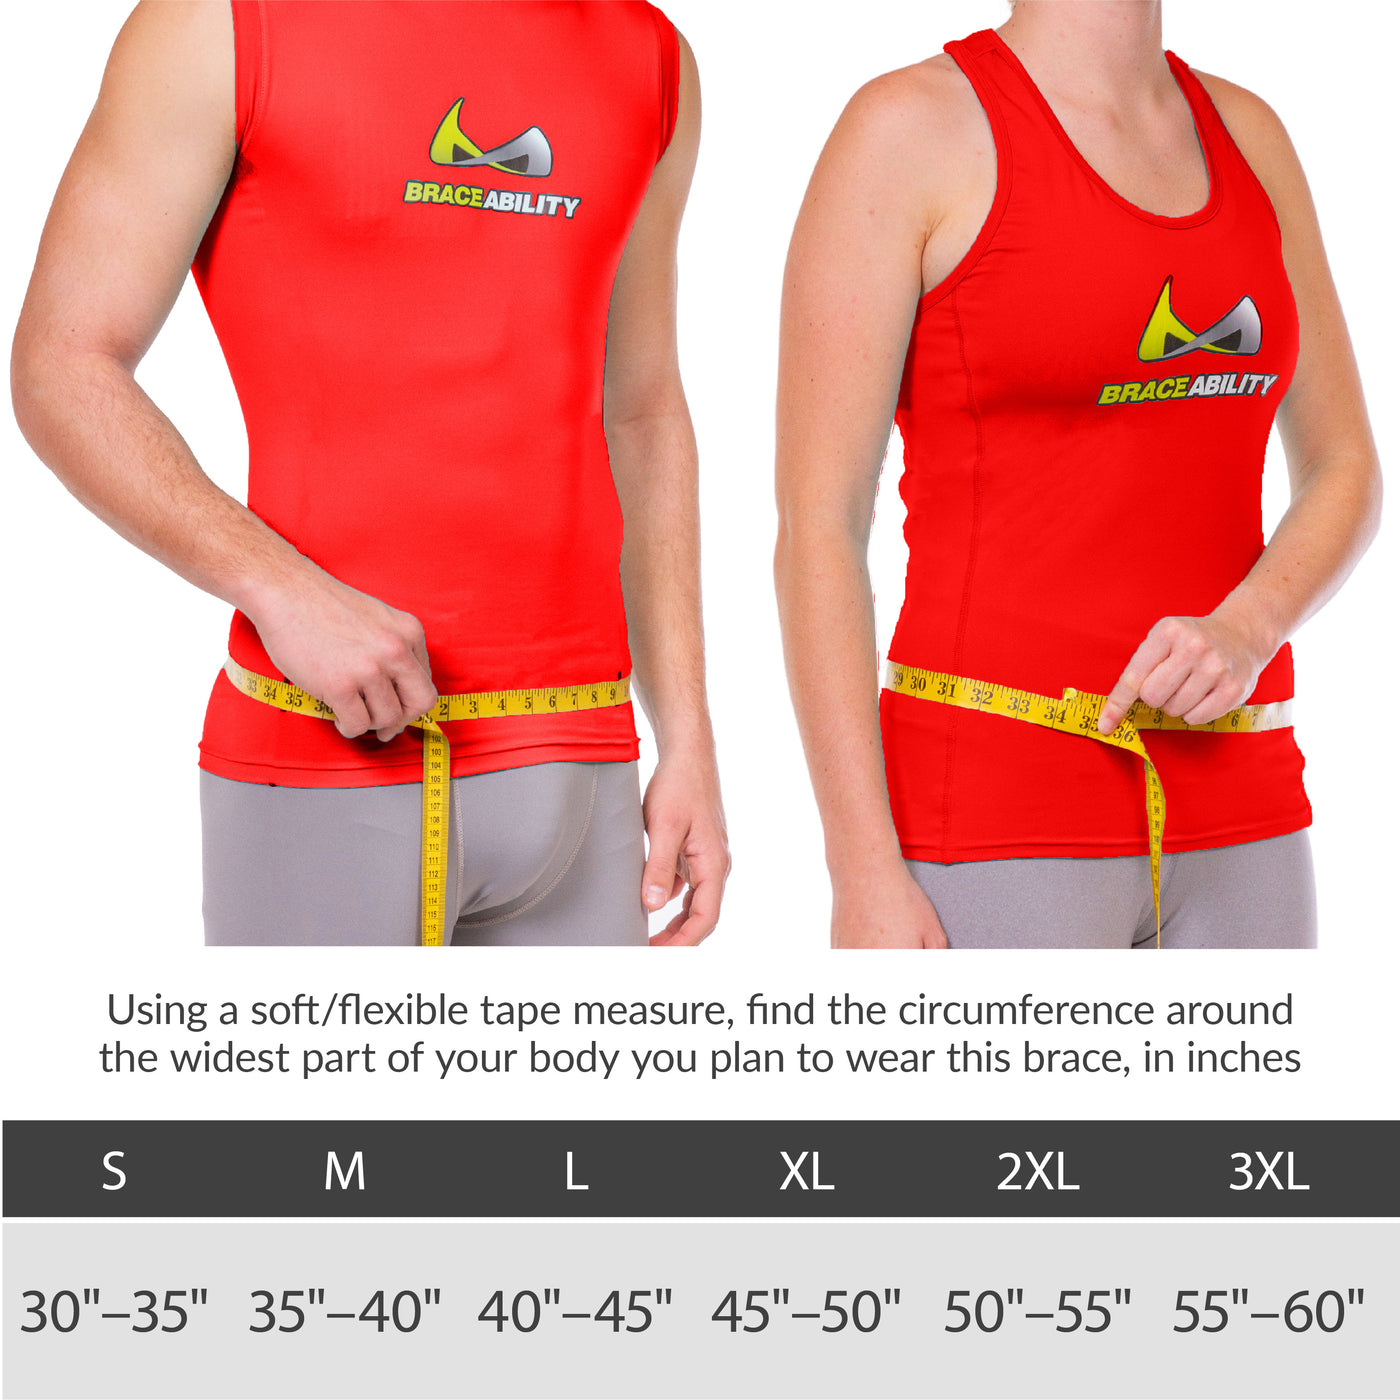 Sizing for the lumbar support back belt comes in 6 sizes fitting hip circumferences from 30 inches to 60 inches